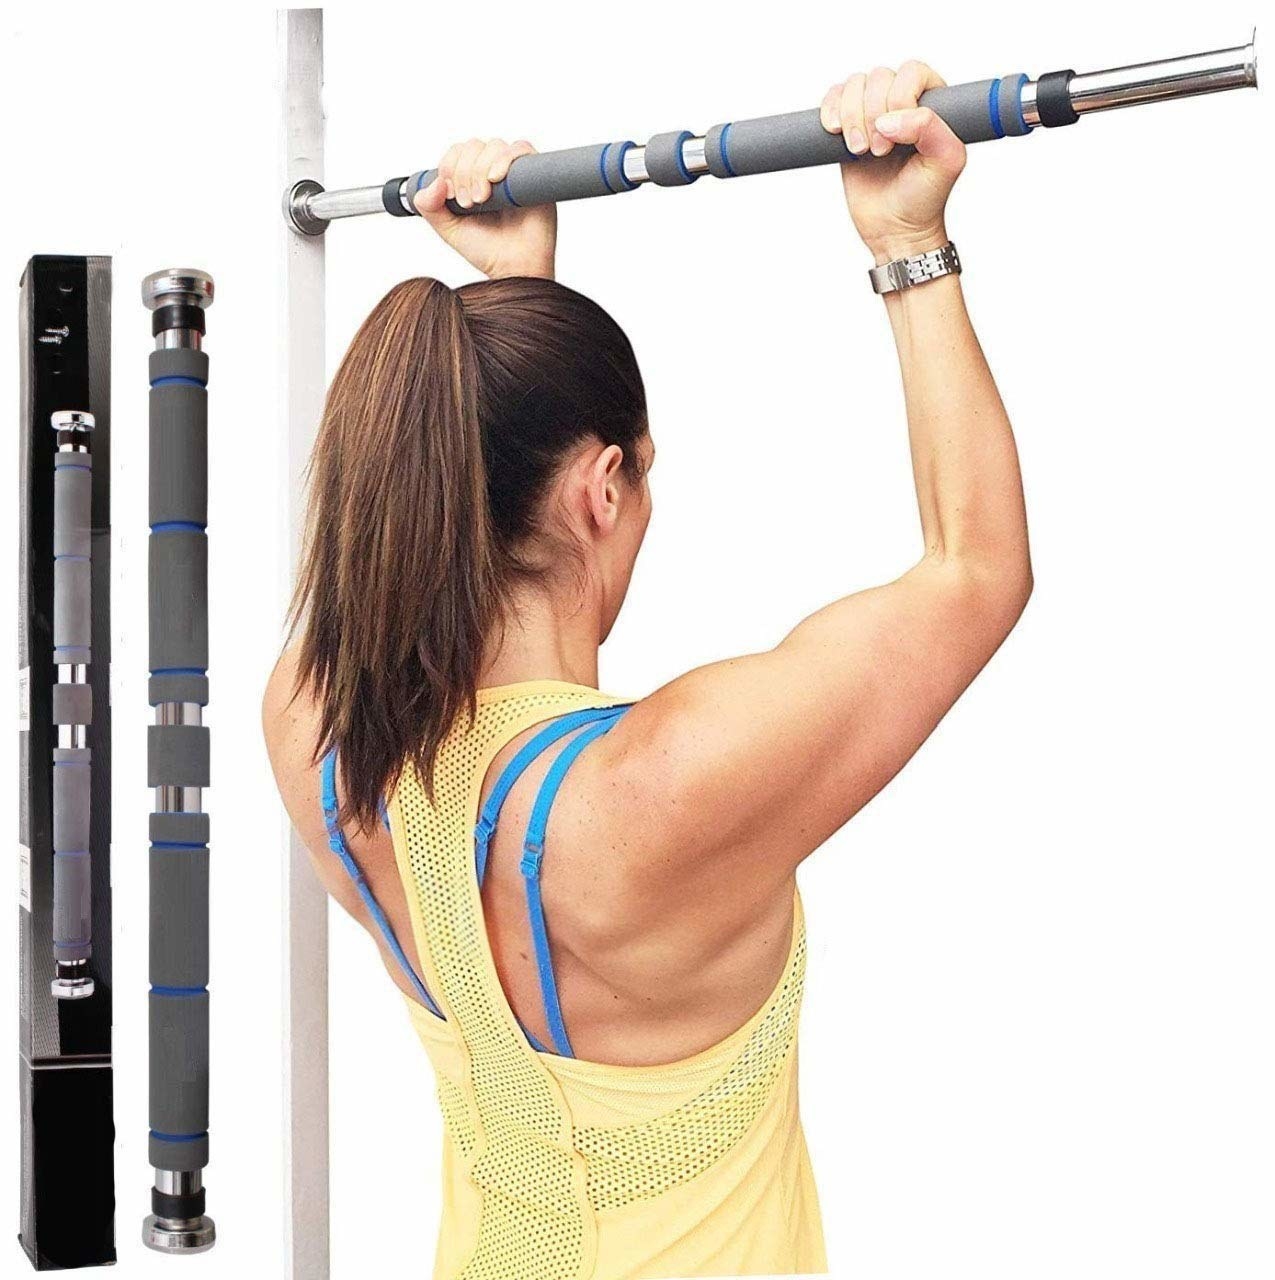 A woman using the pull up bar for pull ups.